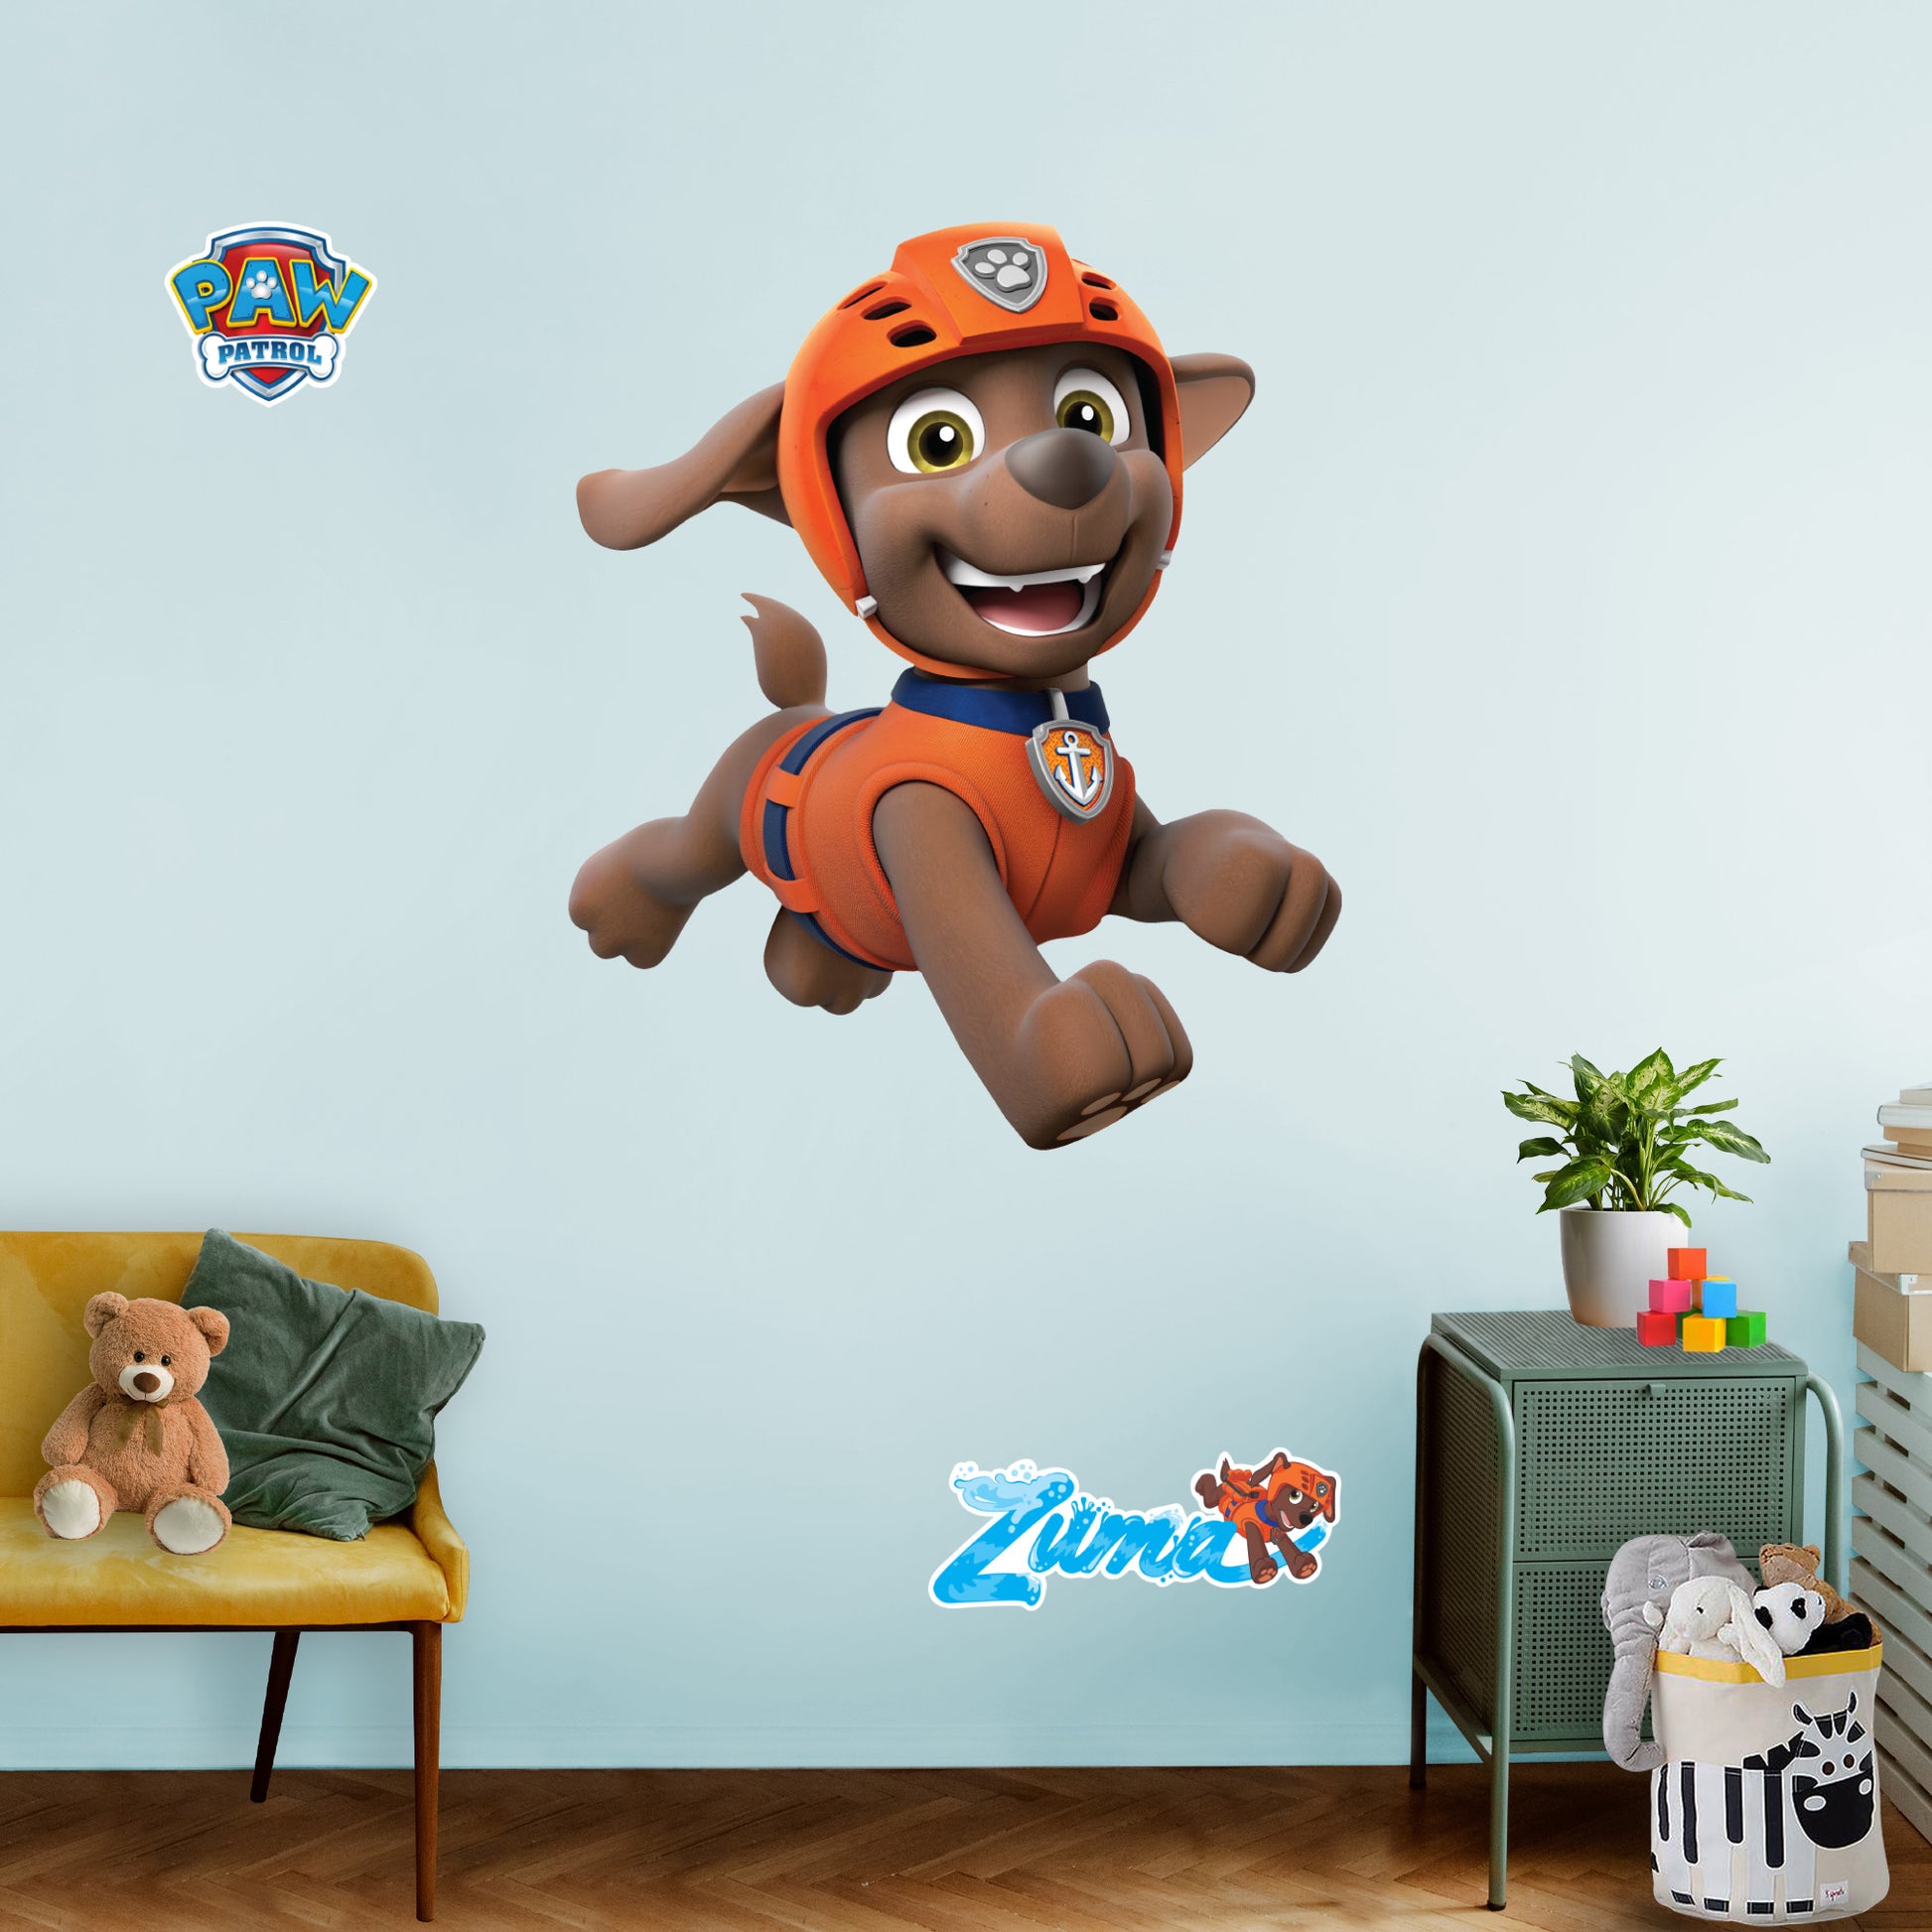 Paw Patrol: Zuma RealBig - Officially Licensed Nickelodeon Removable  Adhesive Decal